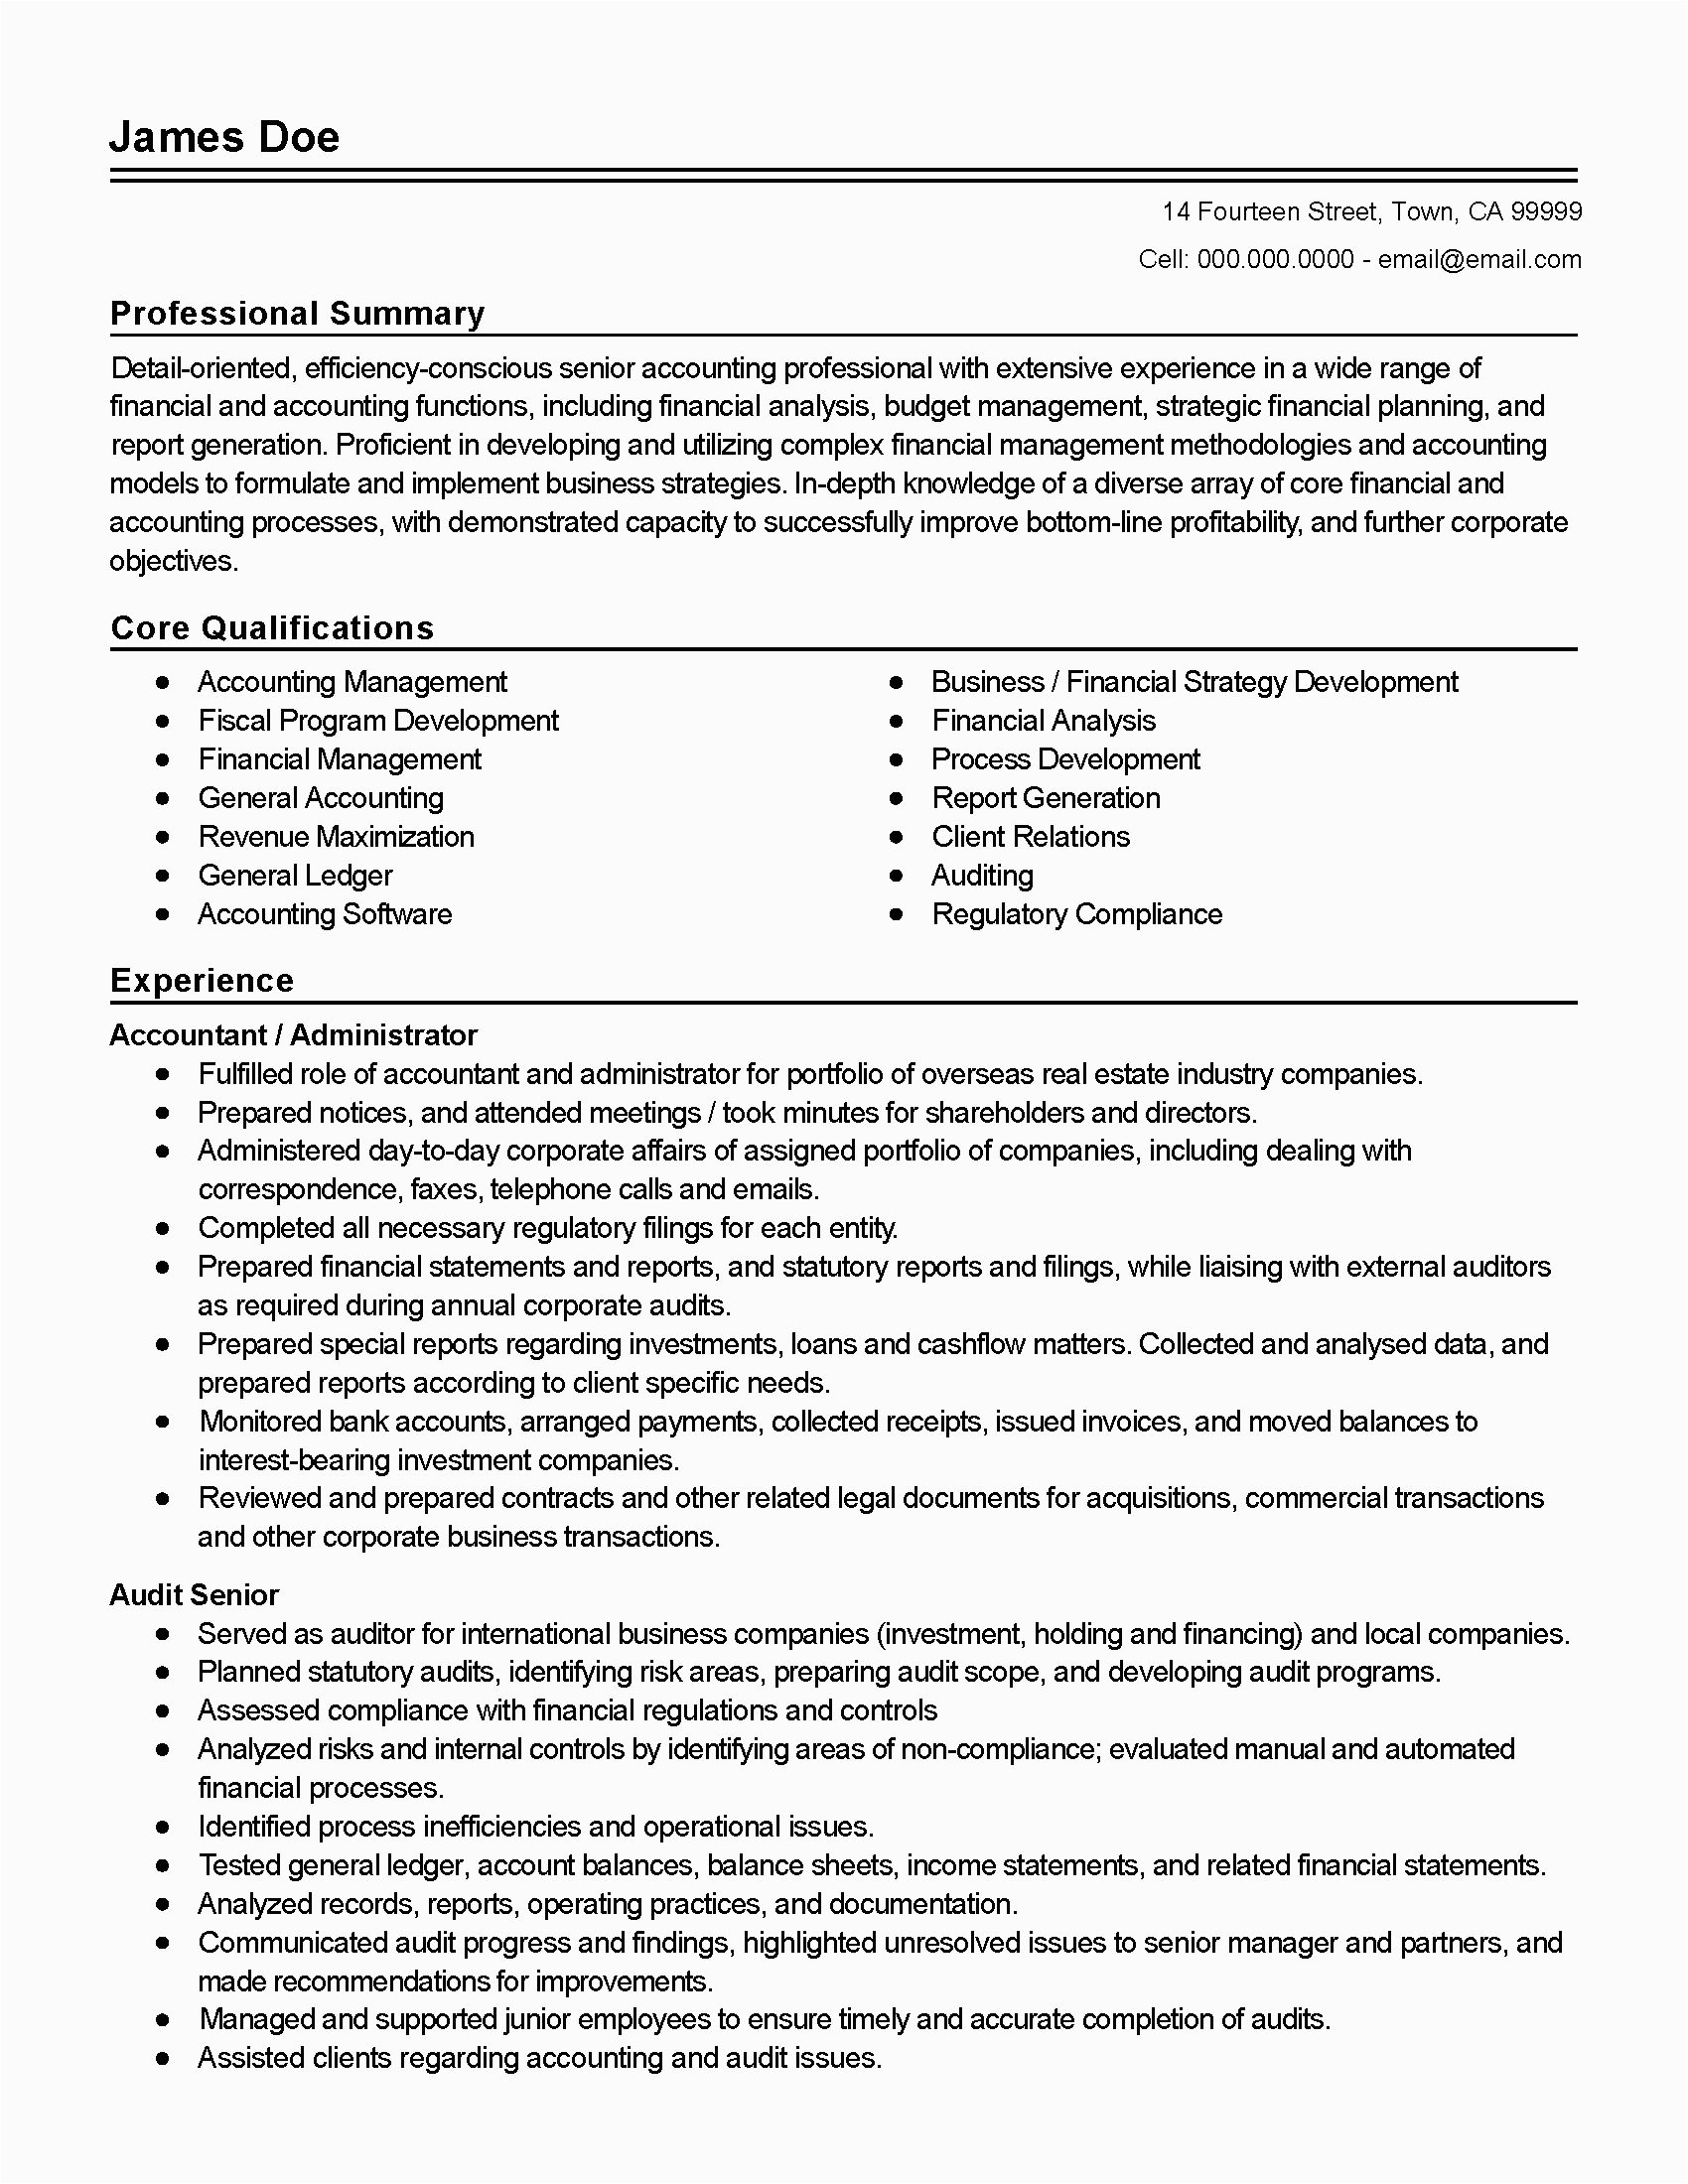 Professional Summary Resume Sample for Accountant Professional Accountant Resume Database Letter Templates